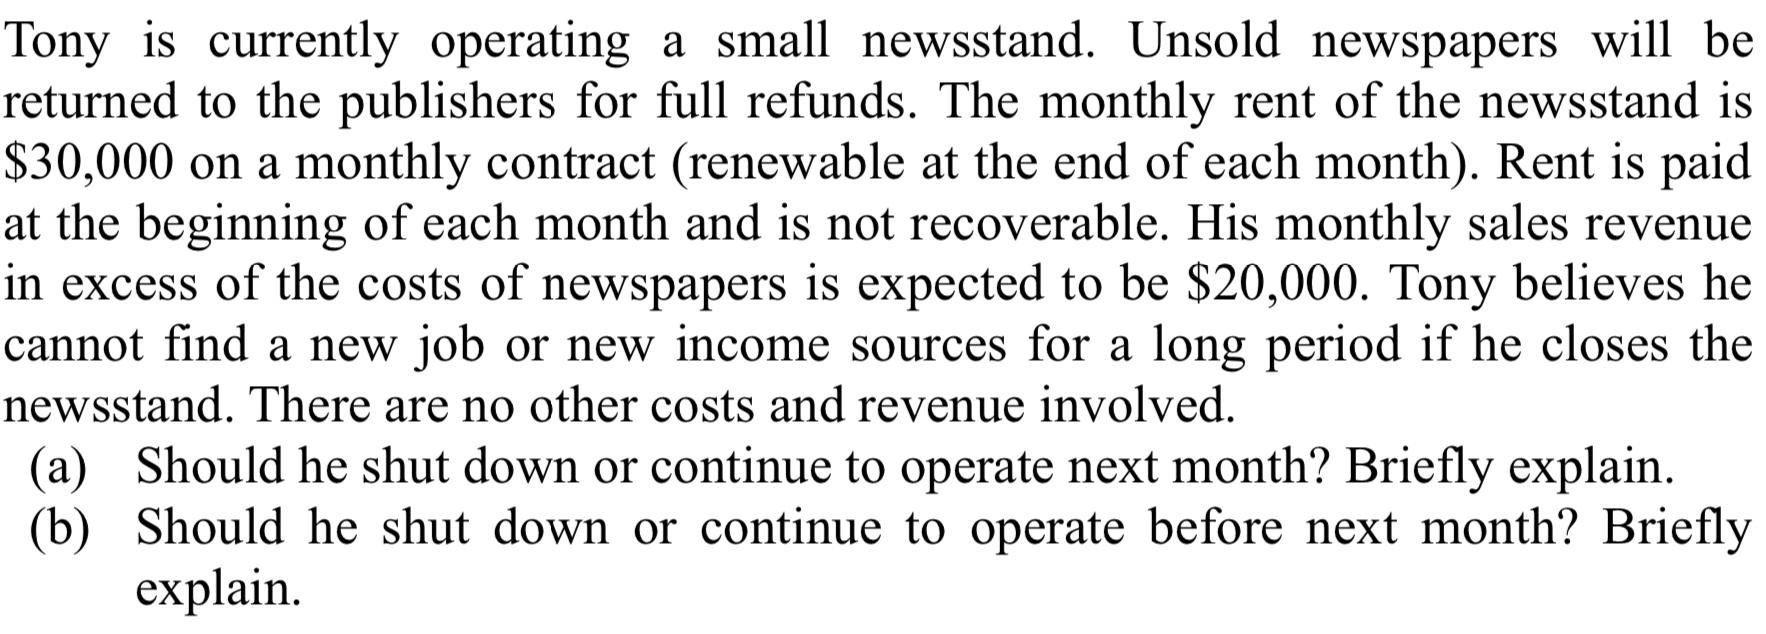 Tony is currently operating a small newsstand. Unsold newspapers will be returned to the publishers for full refunds. The mon